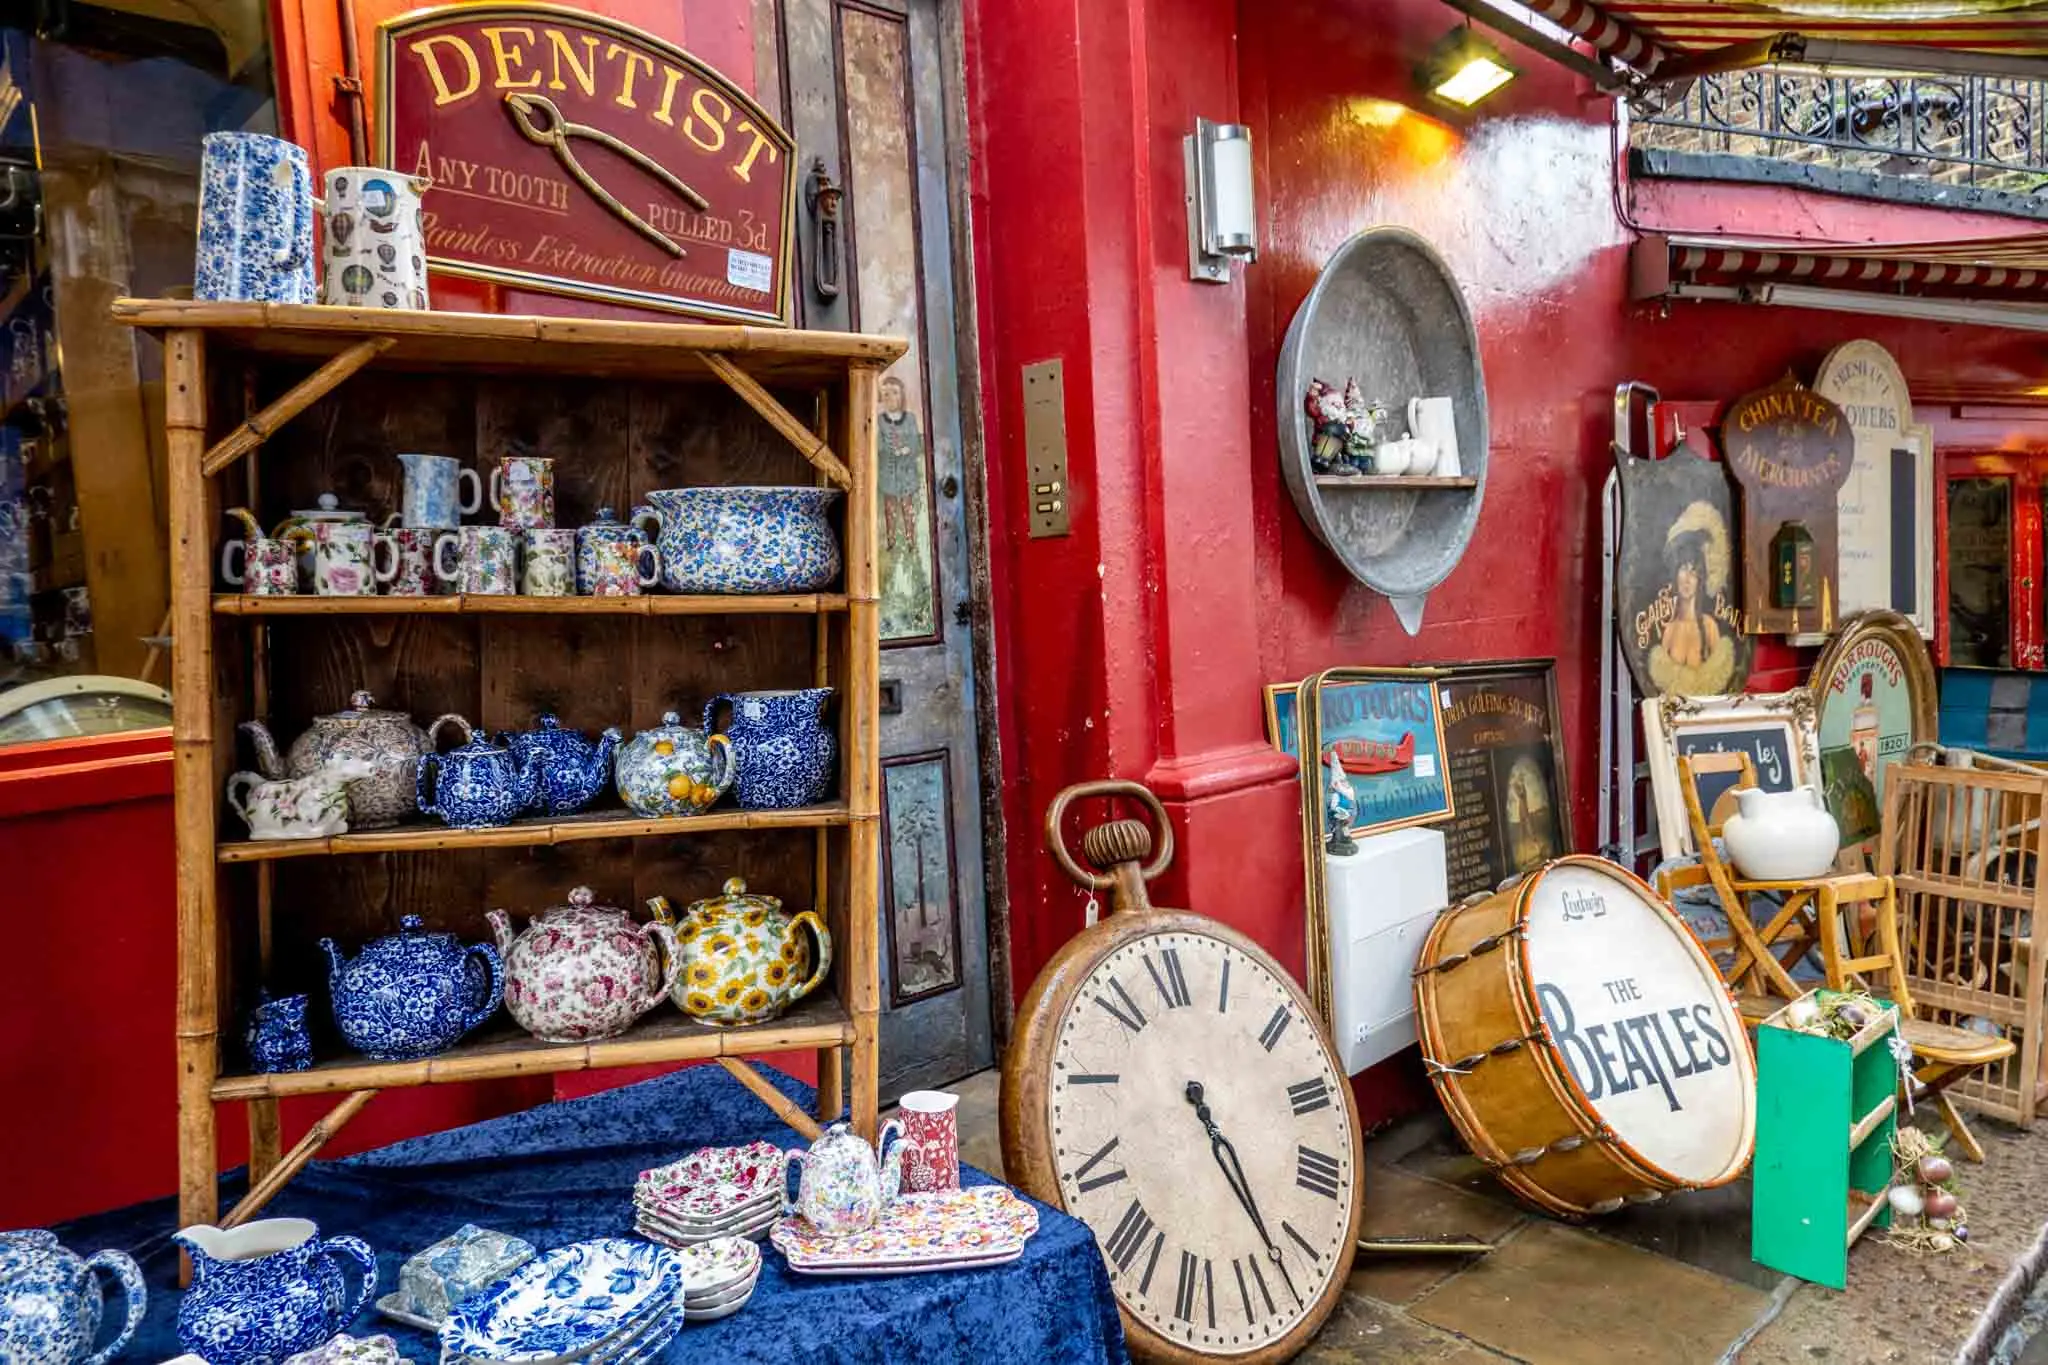 Teapots, ceramics, and other items displayed outside antique shop